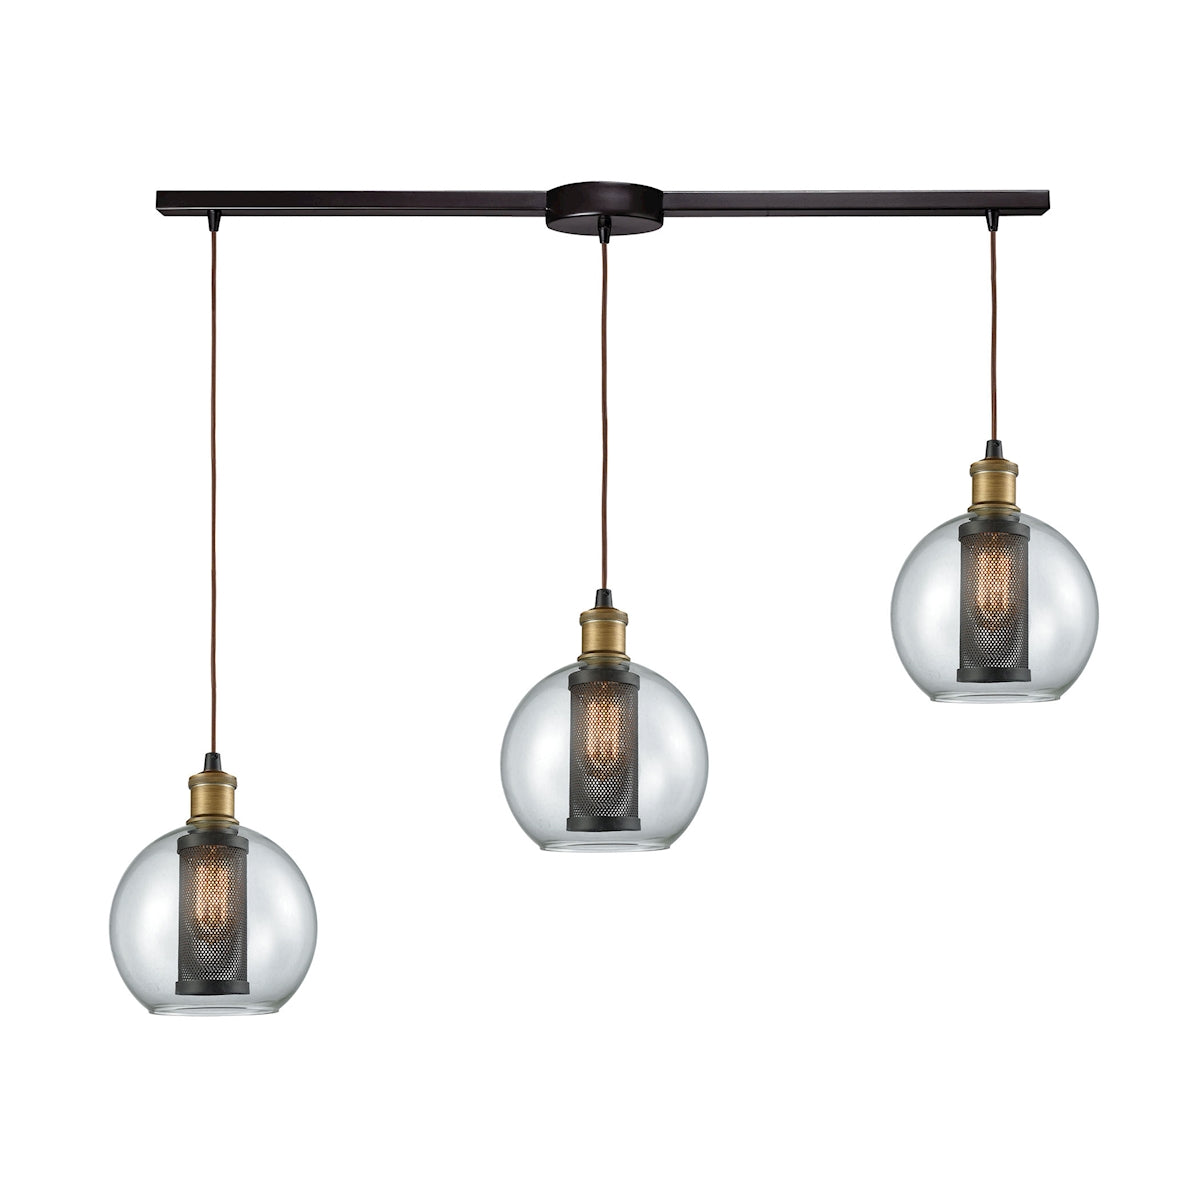 ELK Lighting 14530/3L Bremington 3-Light Linear Mini Pendant Fixture in Oiled Bronze with Clear Glass and Cage